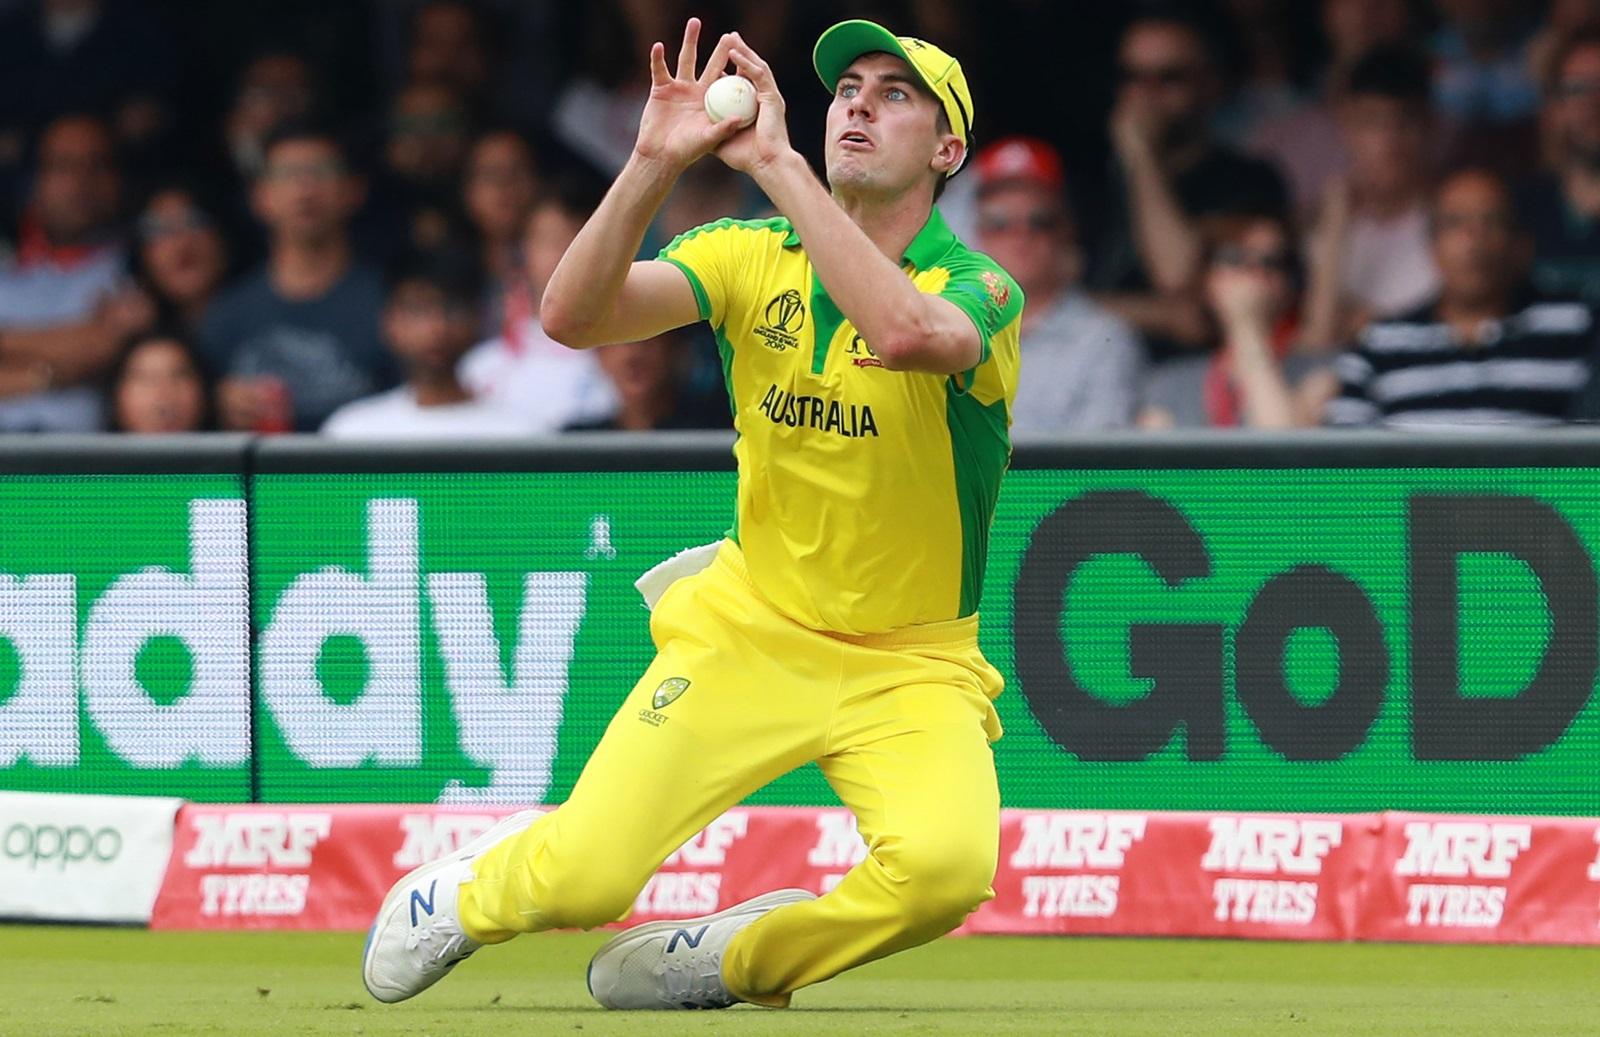 Cummins tipped to hit top gear as Aussies mull No.1 spinner